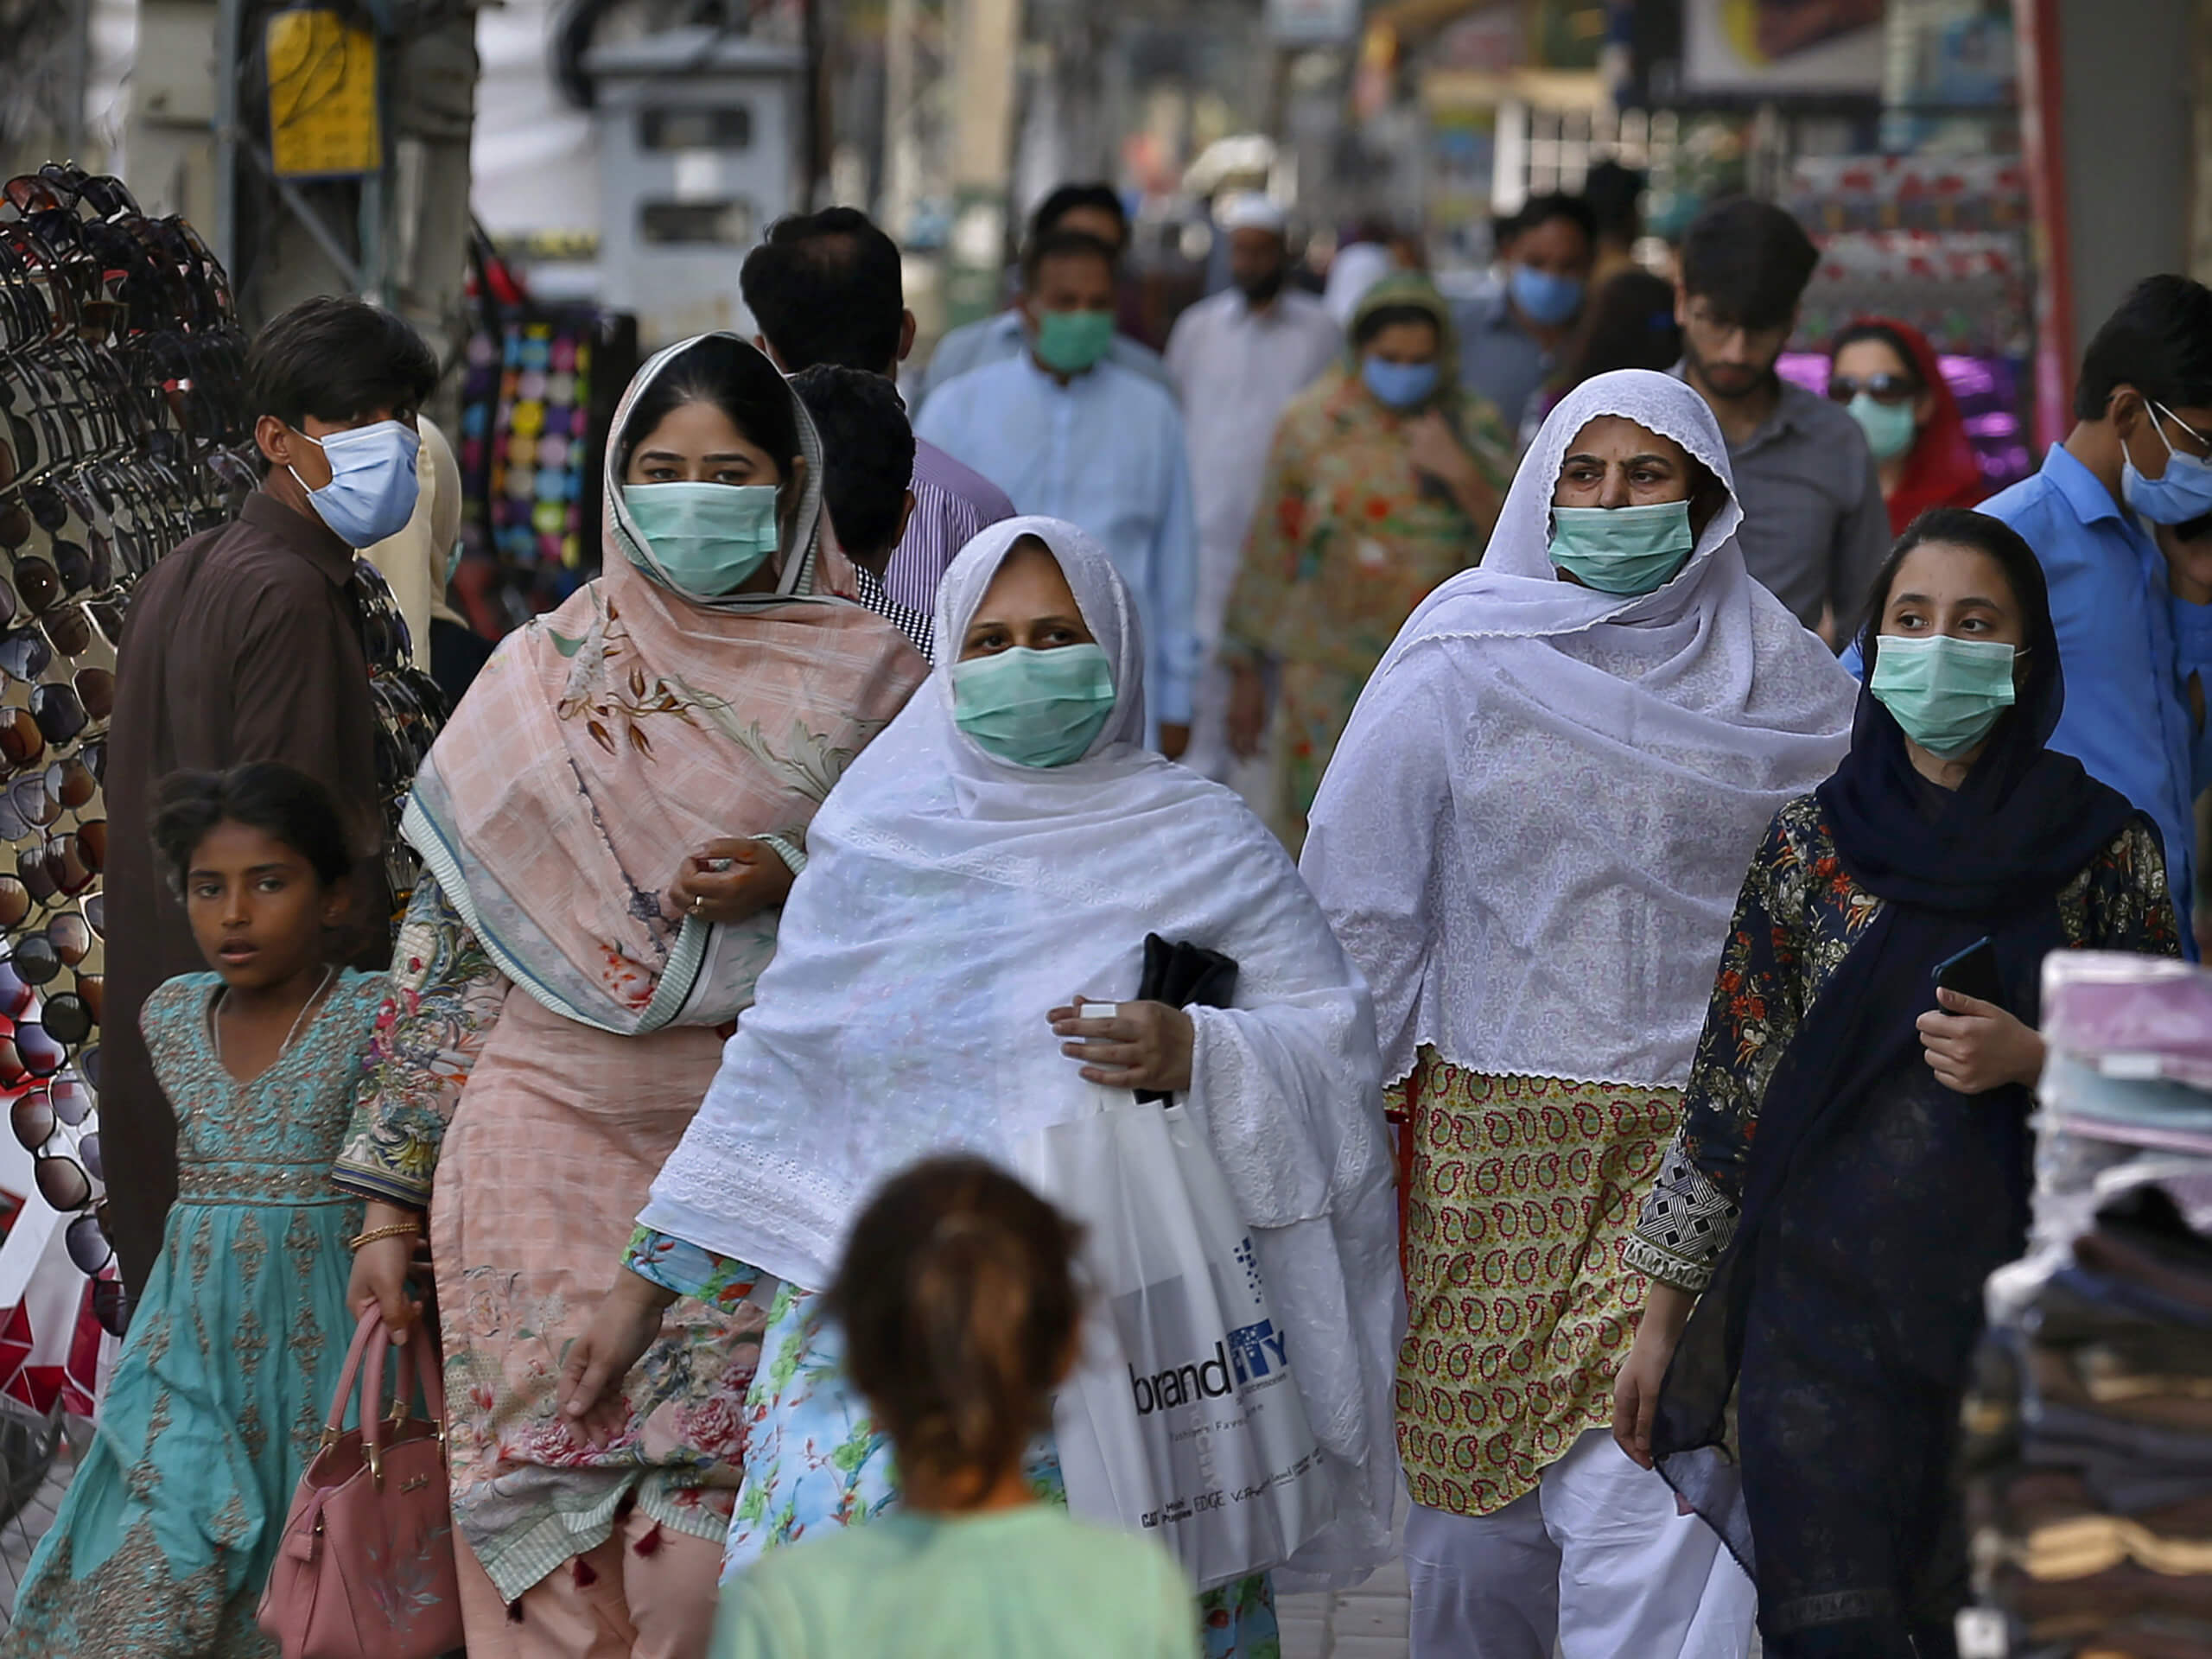 Pakistan has seen the number of coronavirus infections skyrocket in recent days after the government relaxed a lockdown, citing economic necessity.